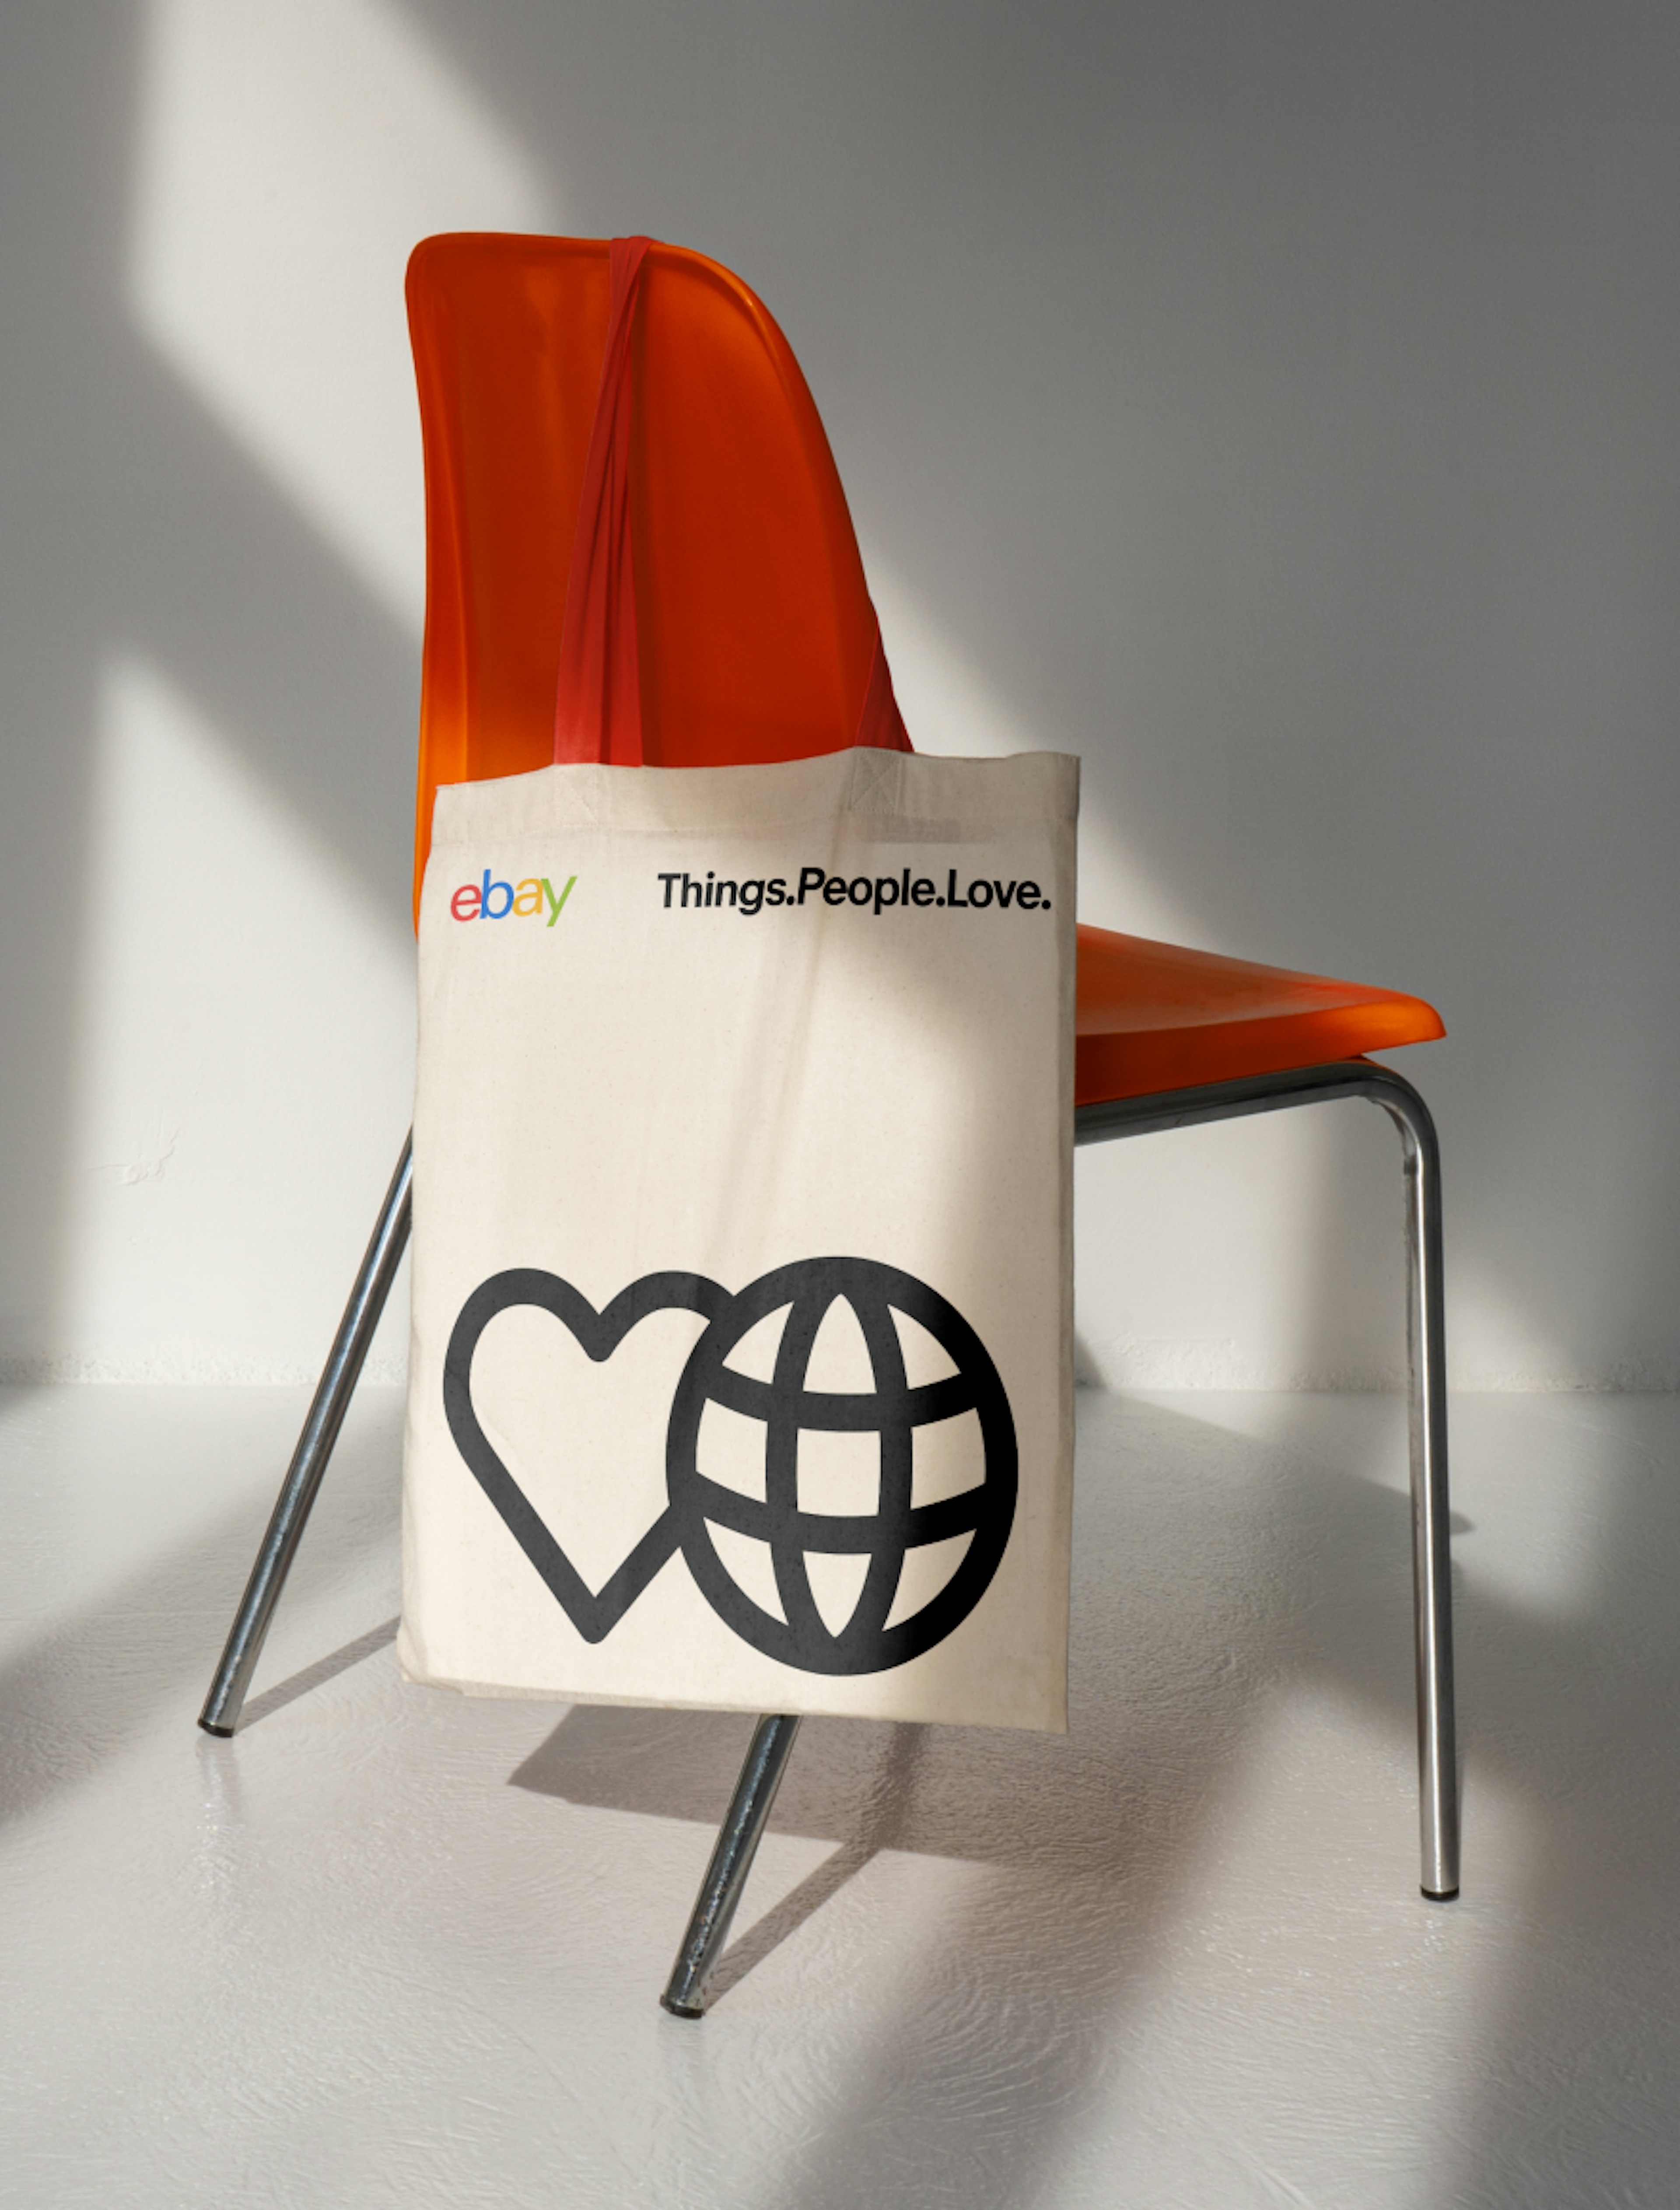 A white tote bag with the eBay logo and the text "Things People Love," featuring a heart and globe icon on the bottom. The tote bag is placed on an orange chair with a simple, modern backdrop.